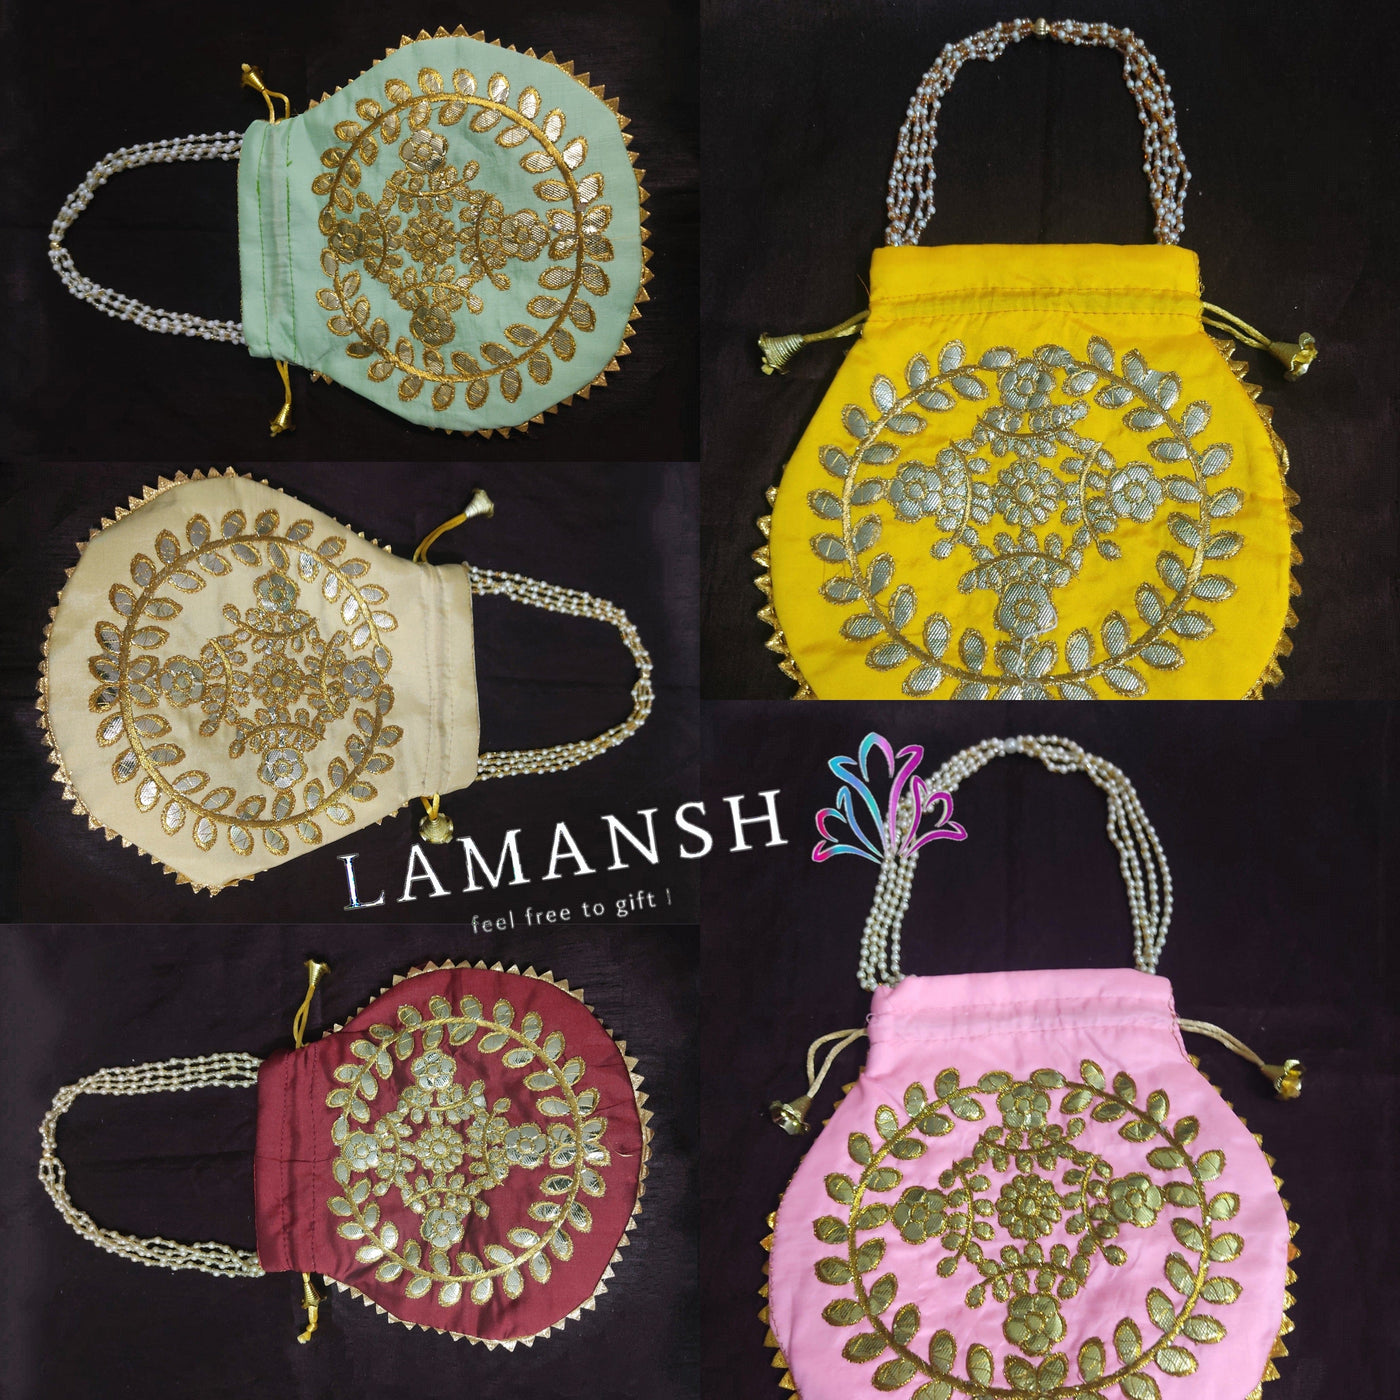 Traditional Embroidered Potli Handbag, Bag With Pearl Handle and Designer  Pattern for Wedding, Evening Party, Ethnic Wear and Gifting. - Etsy Canada  | Fancy bags, Purses and bags, Girly bags